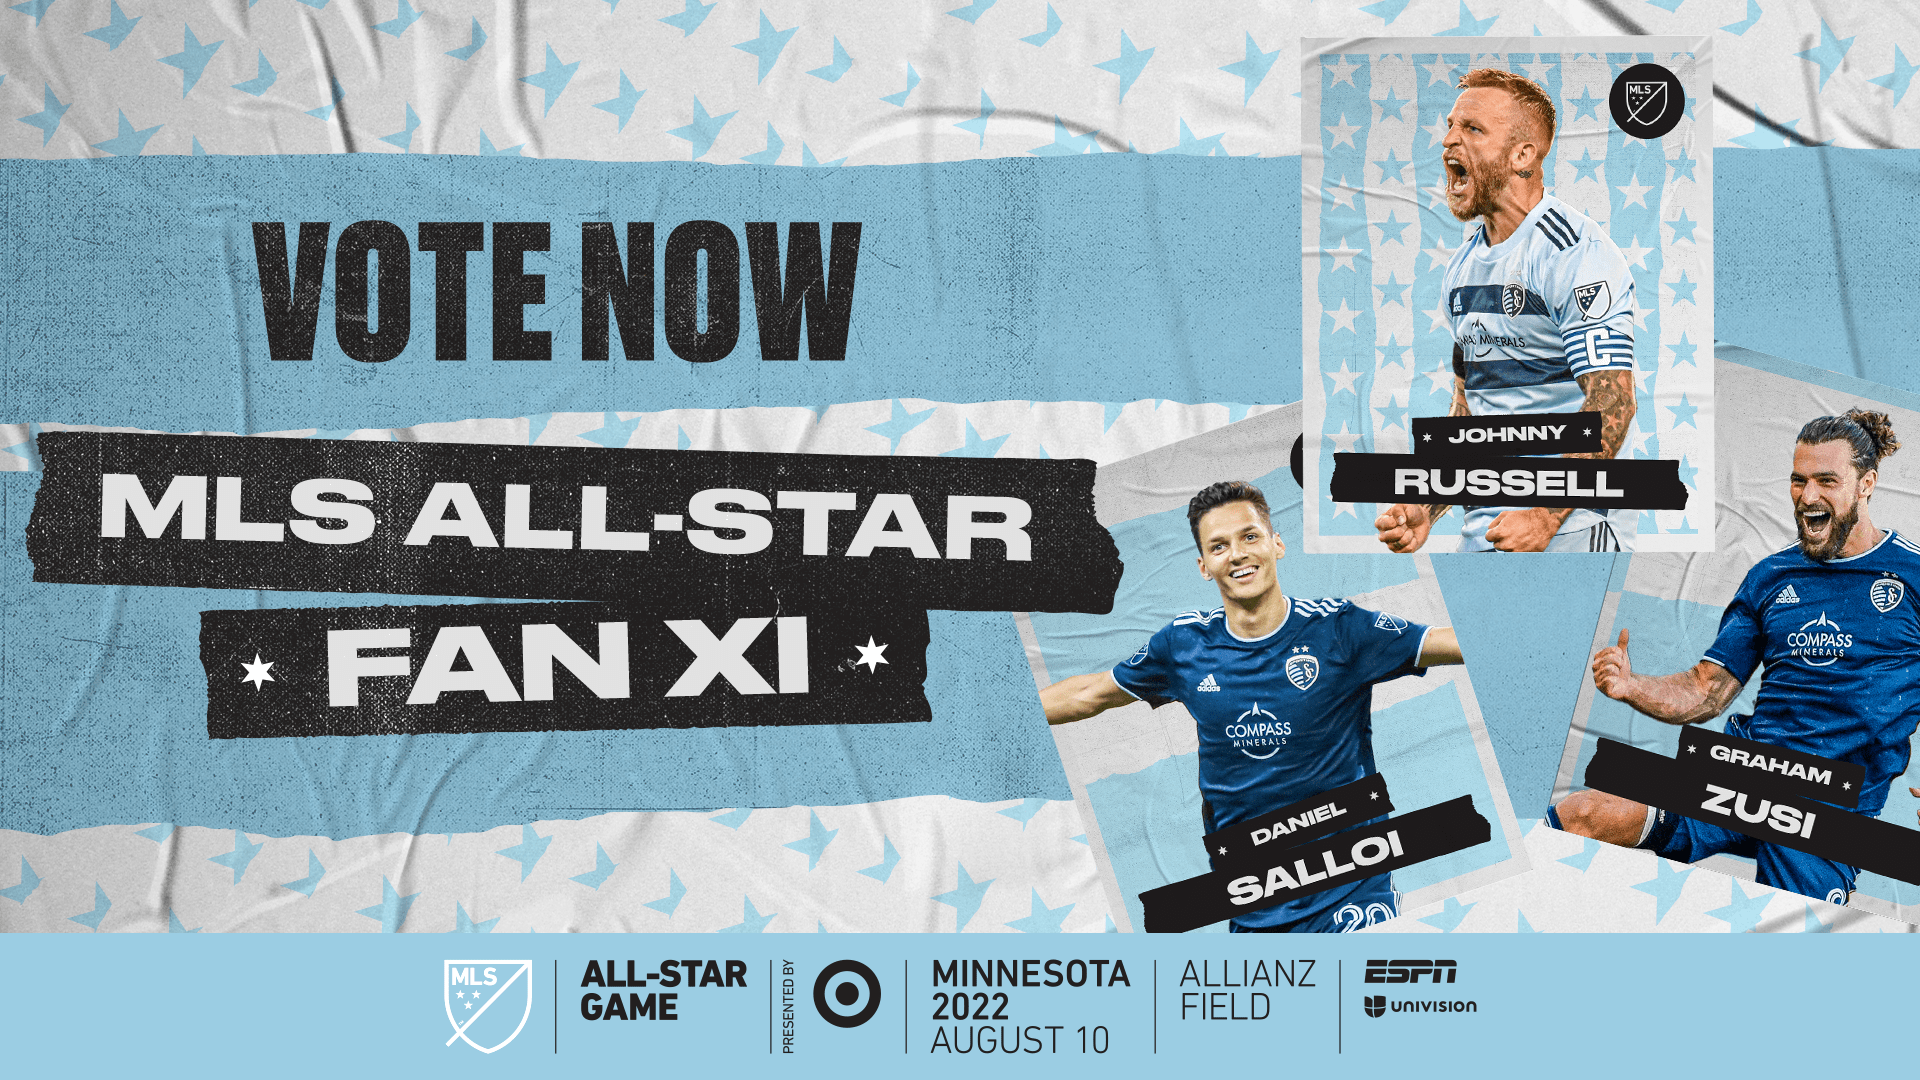 mls all star game 2022 jersey